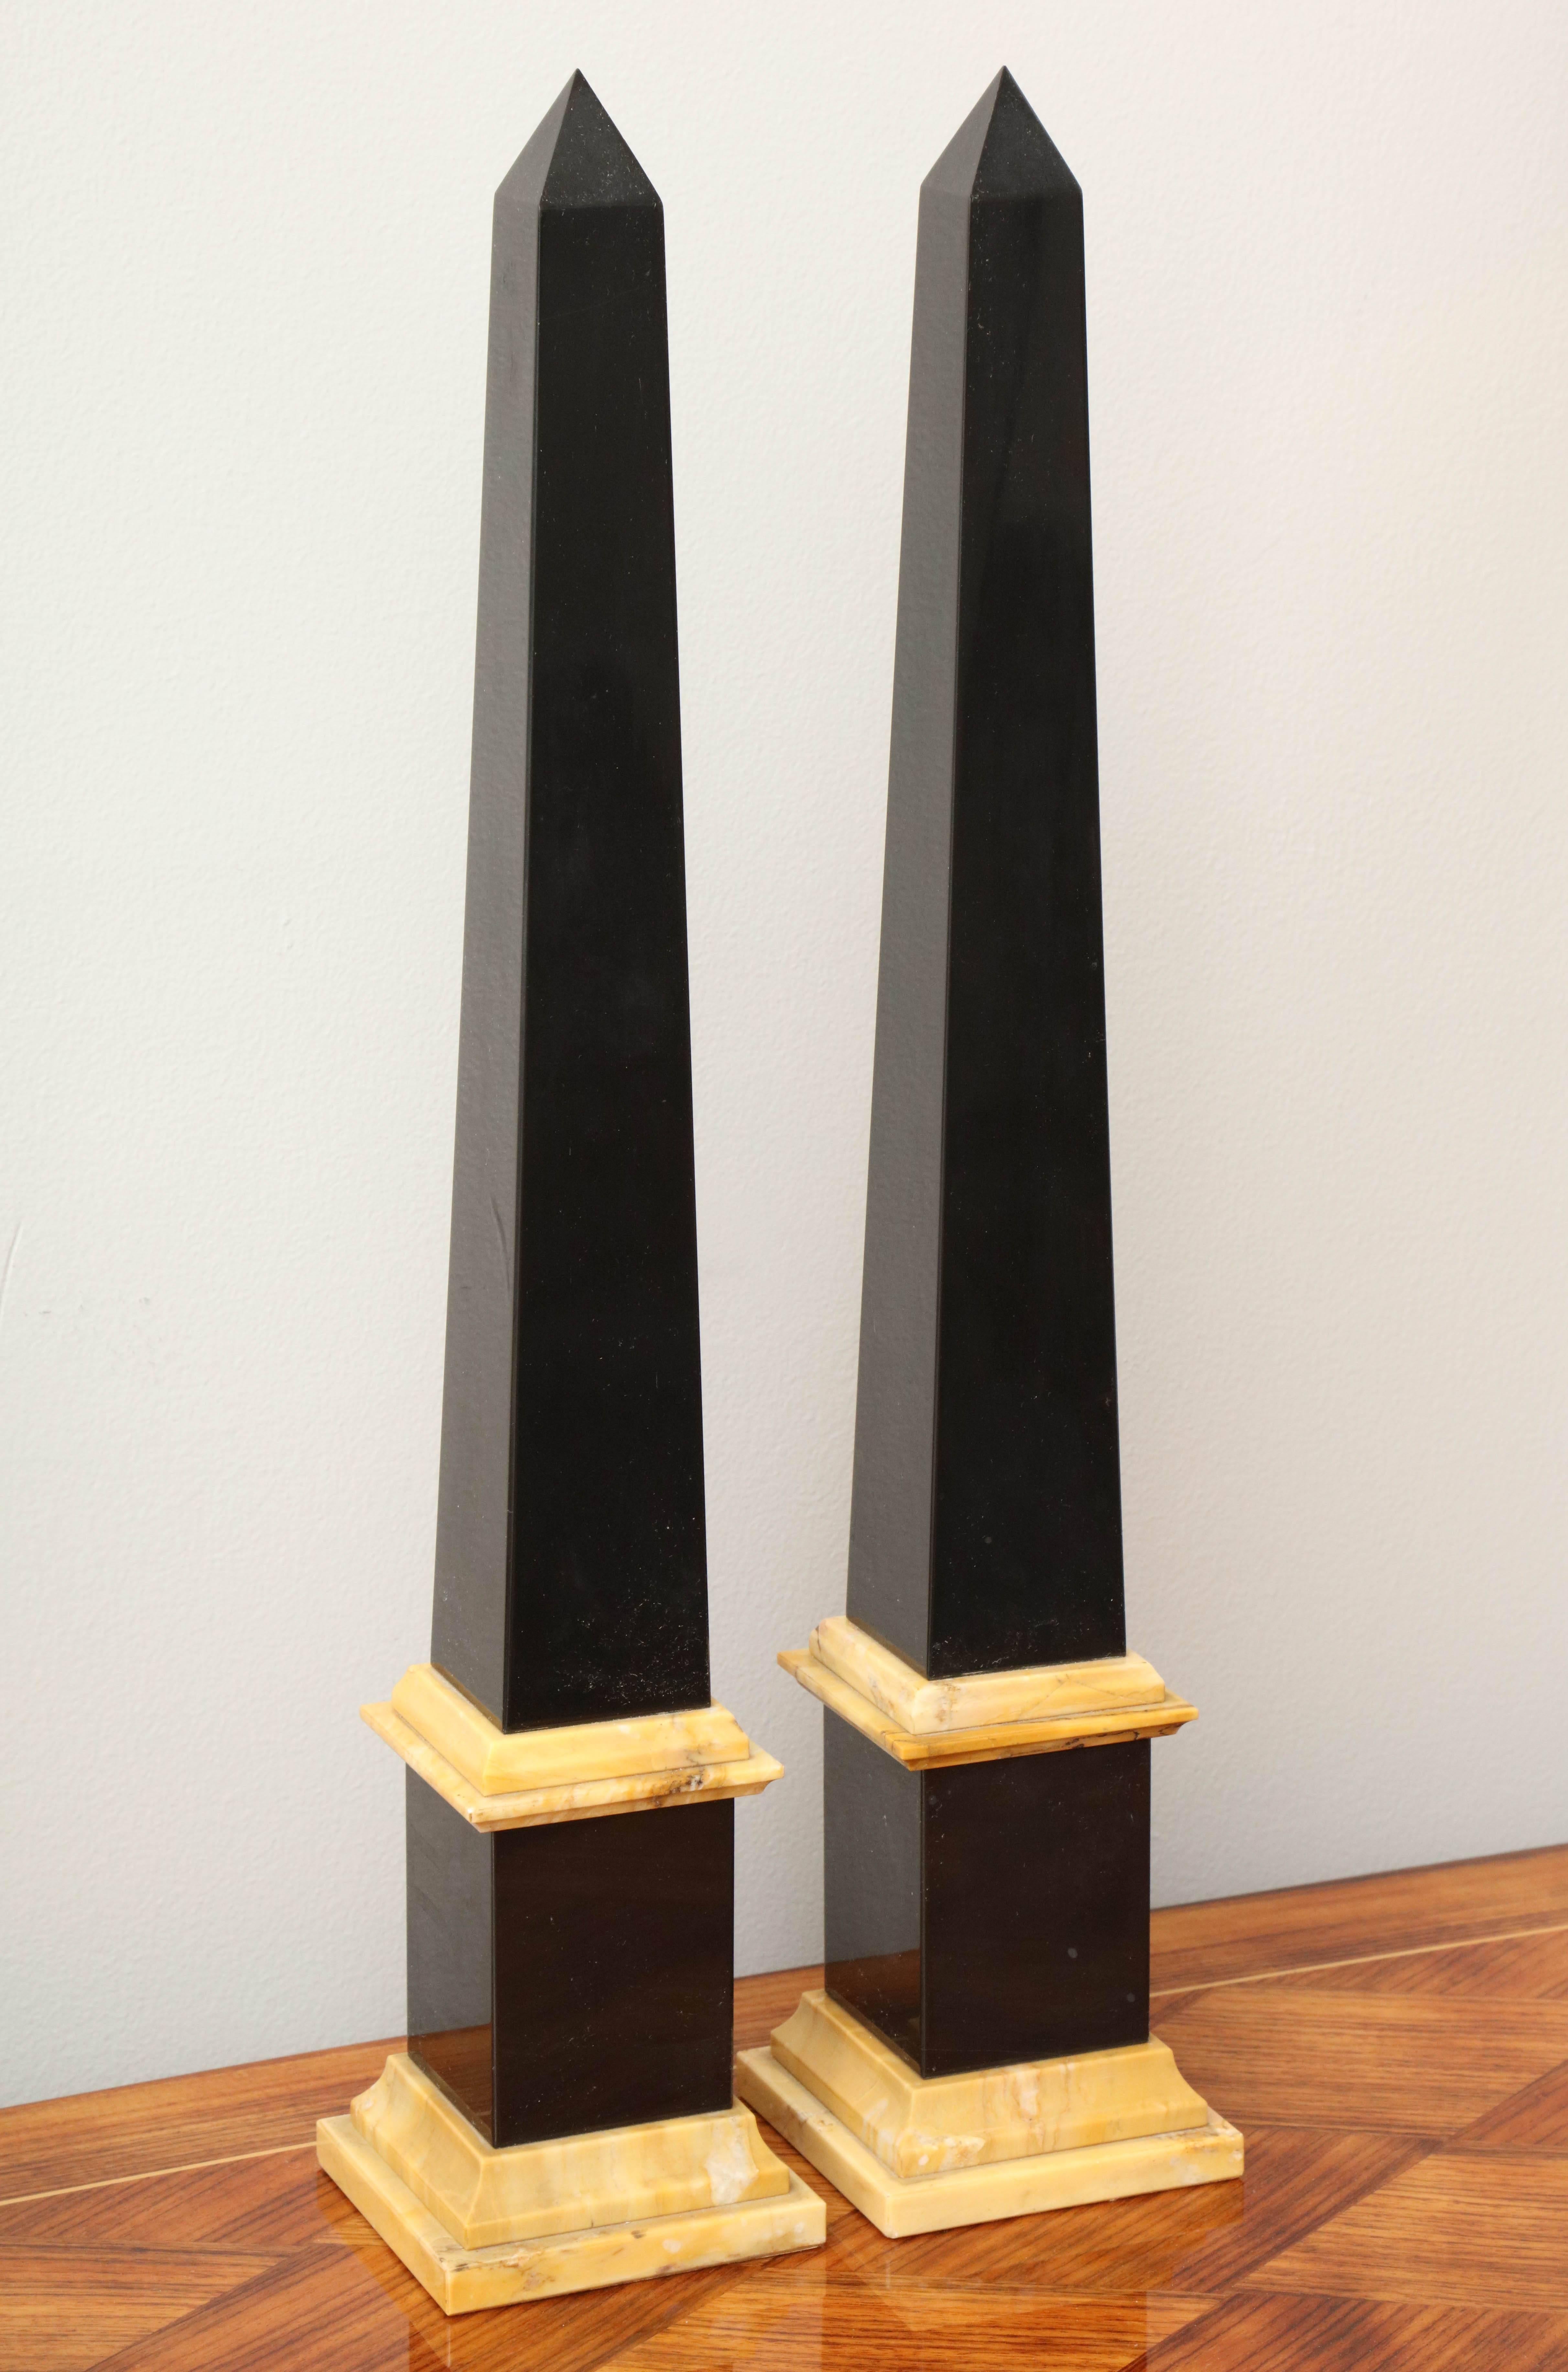 Grand black and Sienna marble obelisks. Pair available; priced and sold individually.